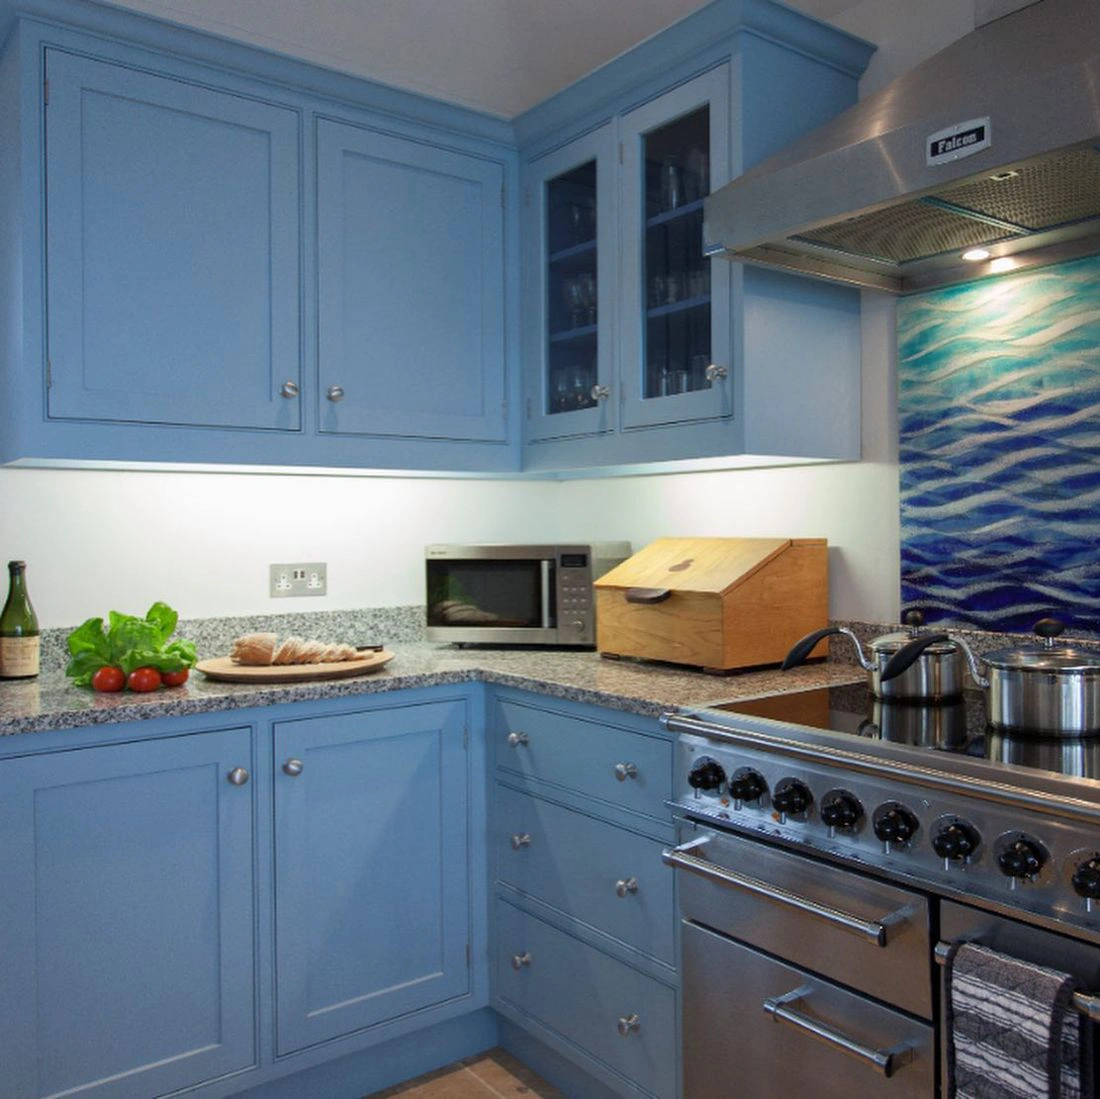 Farrow and Ball Lulworth Blue 89 kitchen cabinets